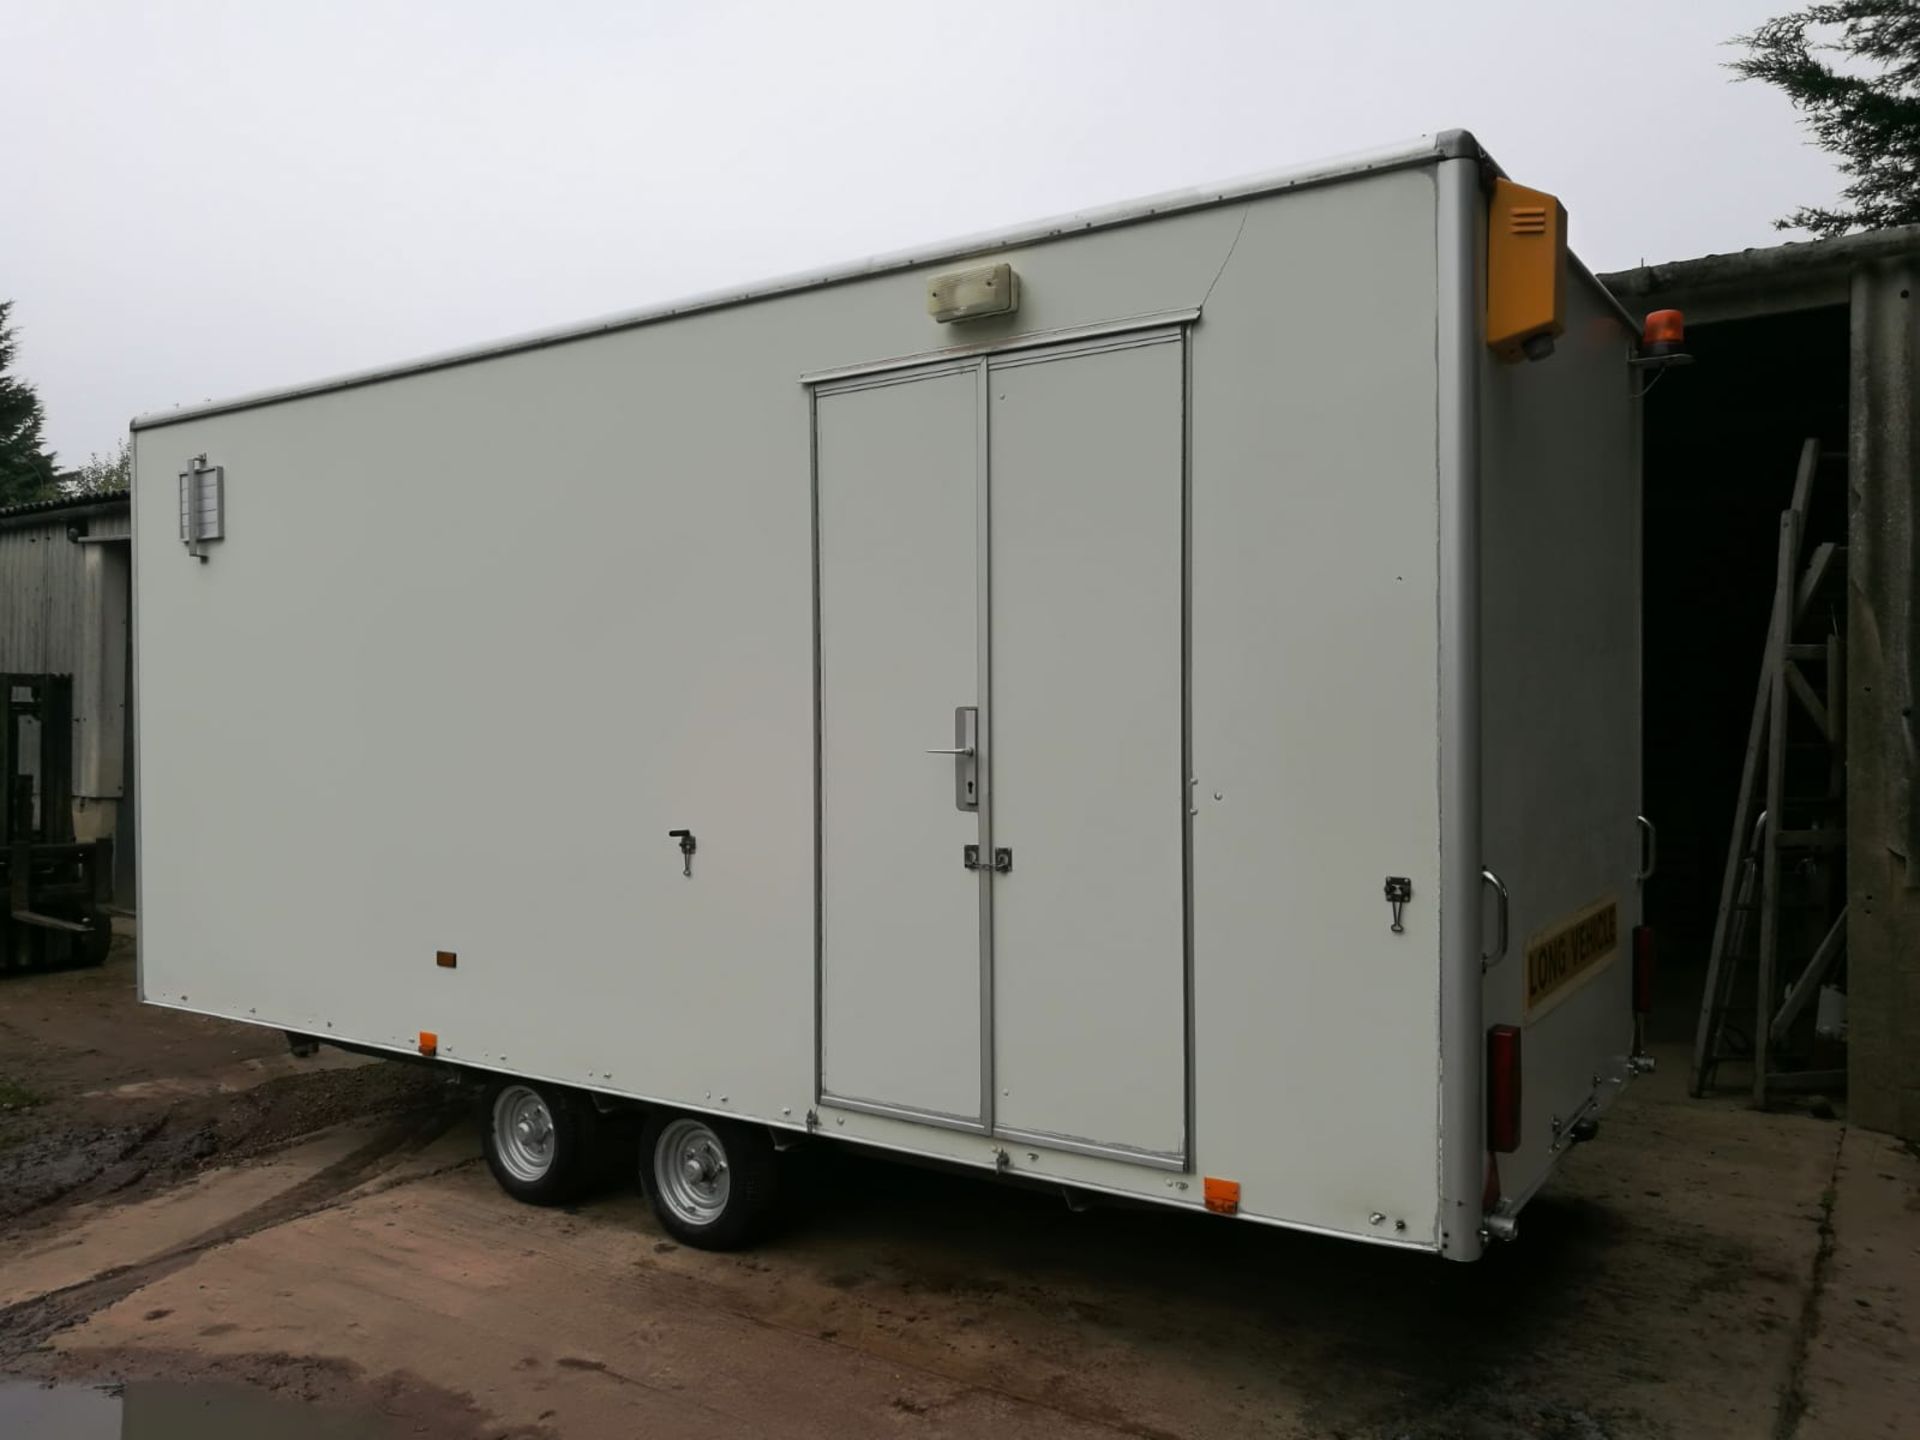 LYNTON 3.5 TON GTW CABLE BRAKES 19 FOOT LONG OR 5.8M, TRAILER DIRECT FROM BT *PLUS VAT* - Image 3 of 7